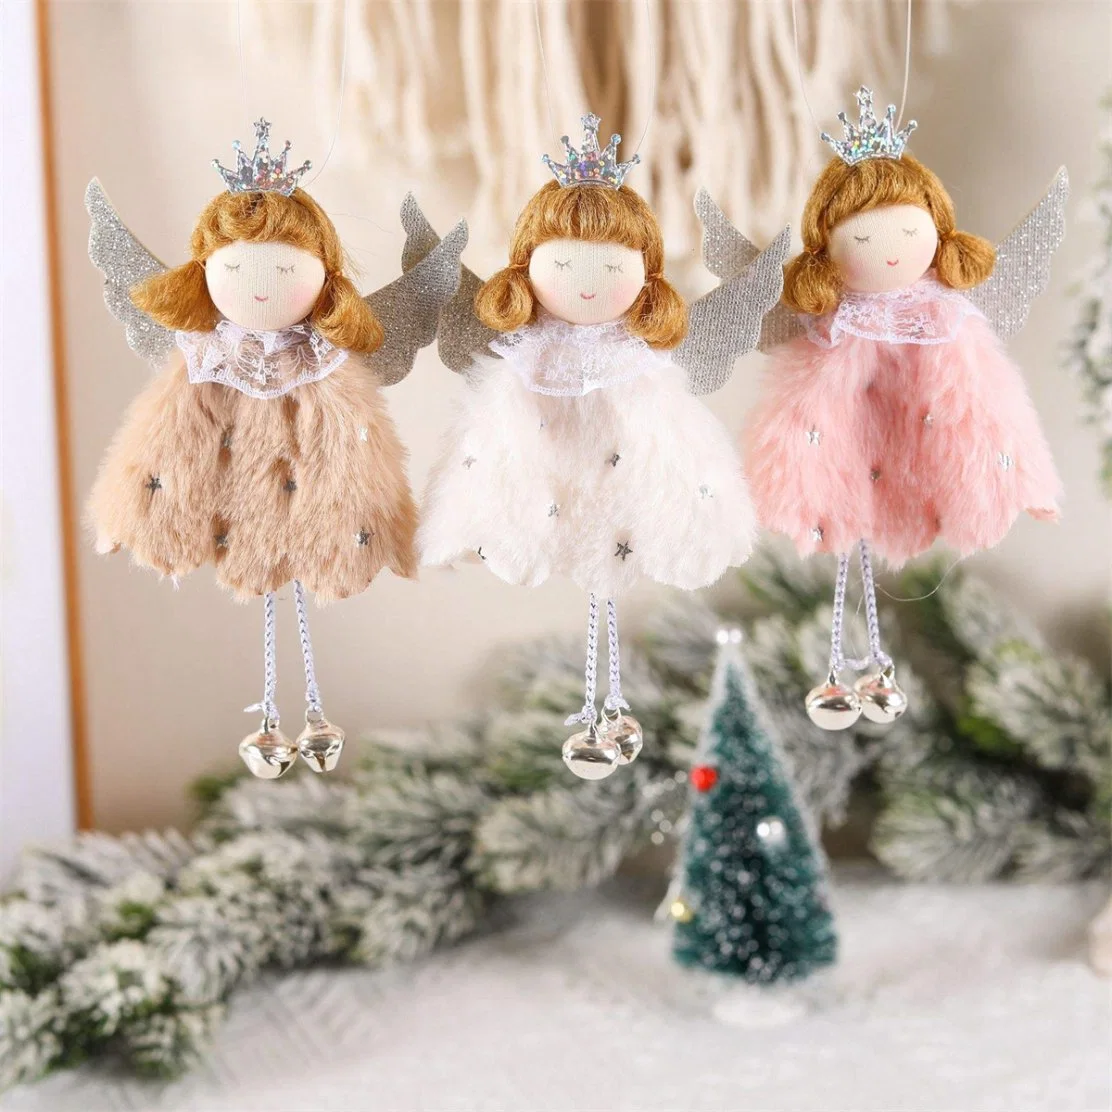 Angel Doll Christmas Tree Pendant Ornaments Xmas Gifts Hanging Decorations Party Supplies